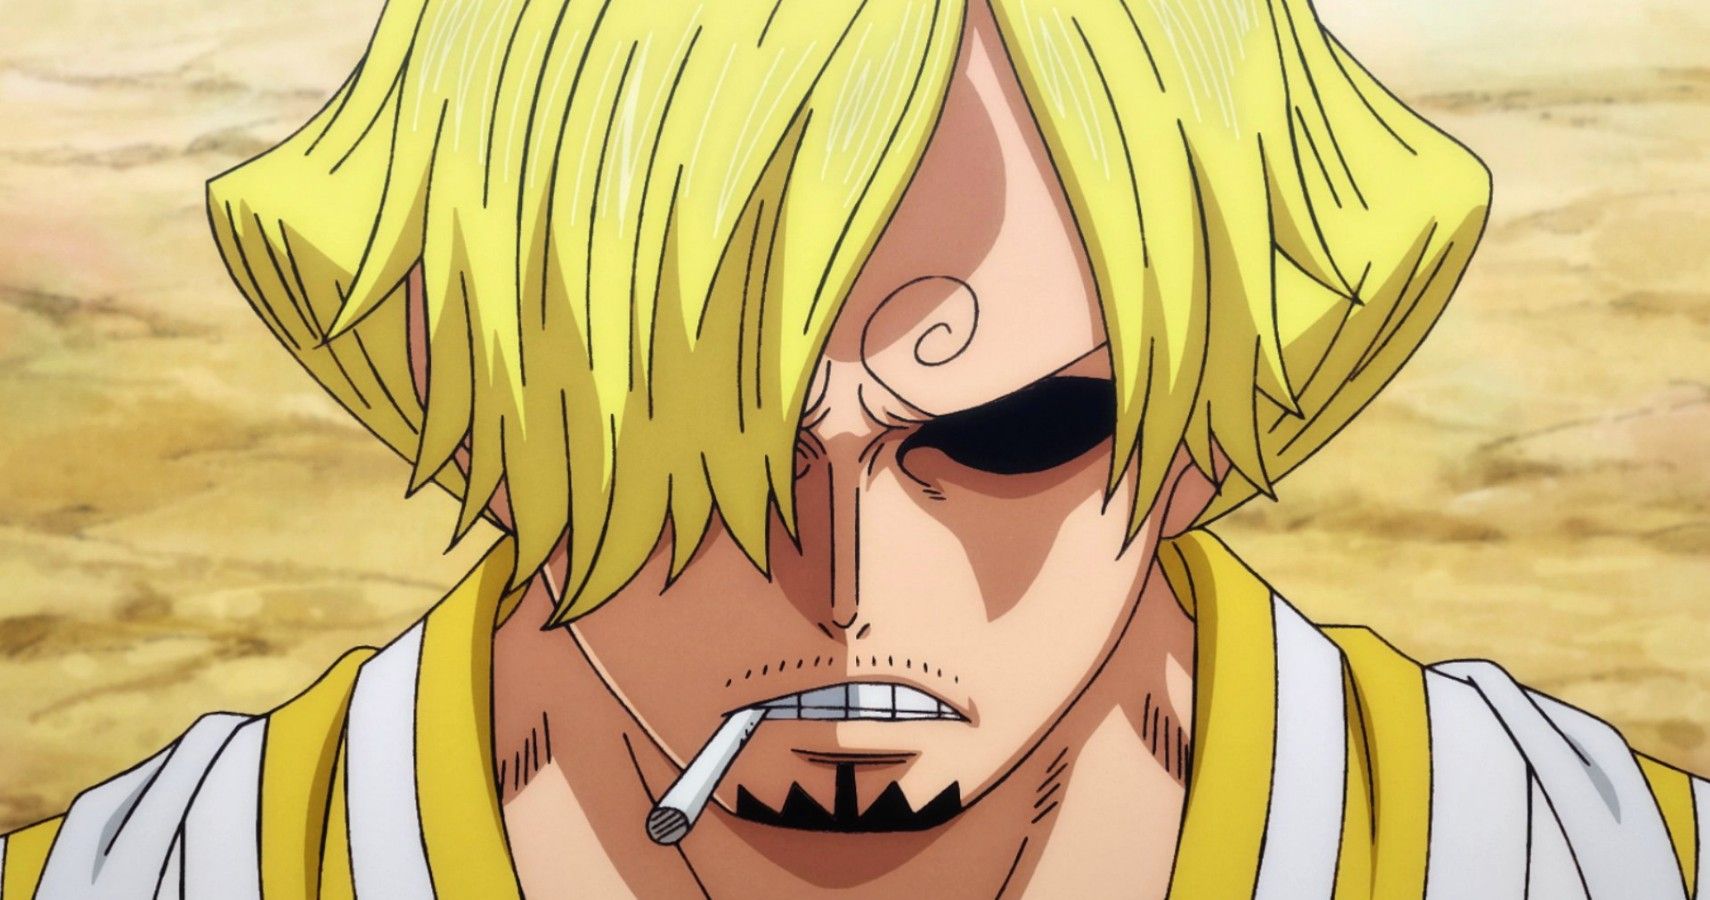 One Piece Sanjis 10 Best Moves Ranked According To Strength.